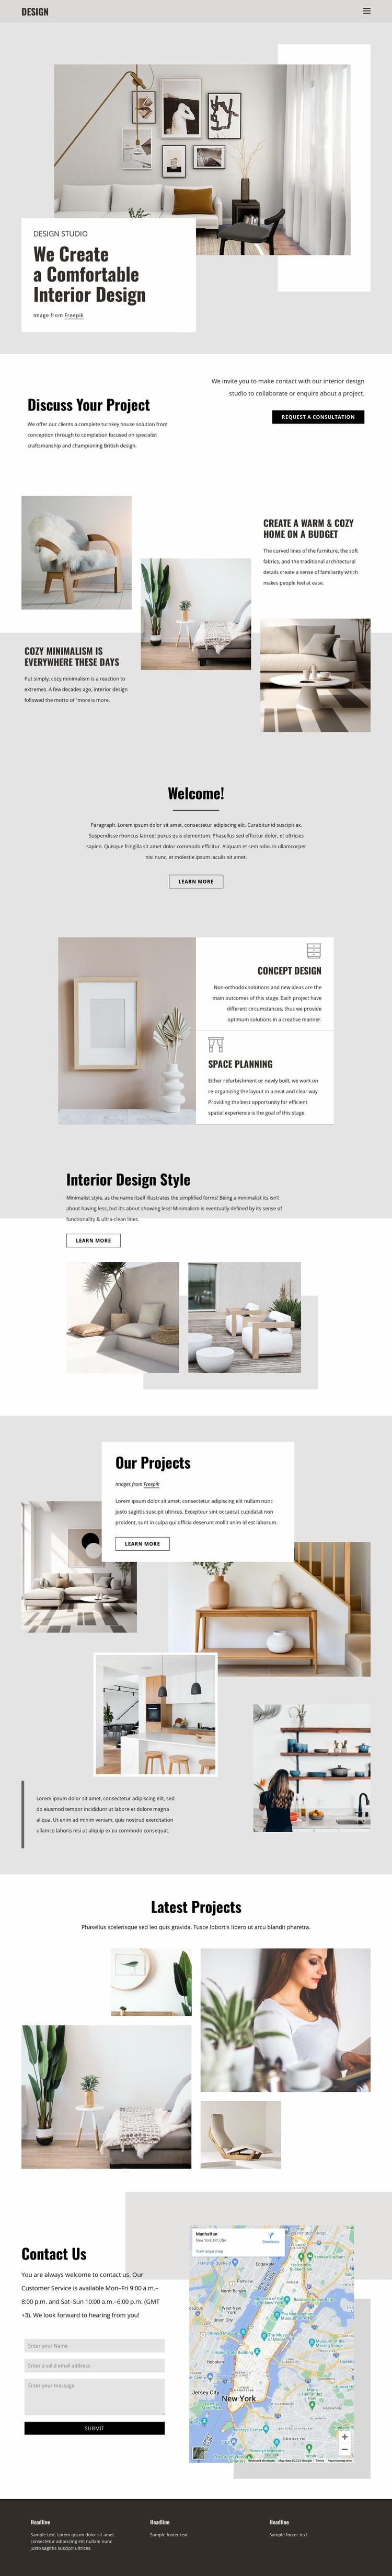 Designing Spaces and building dreams Homepage Design